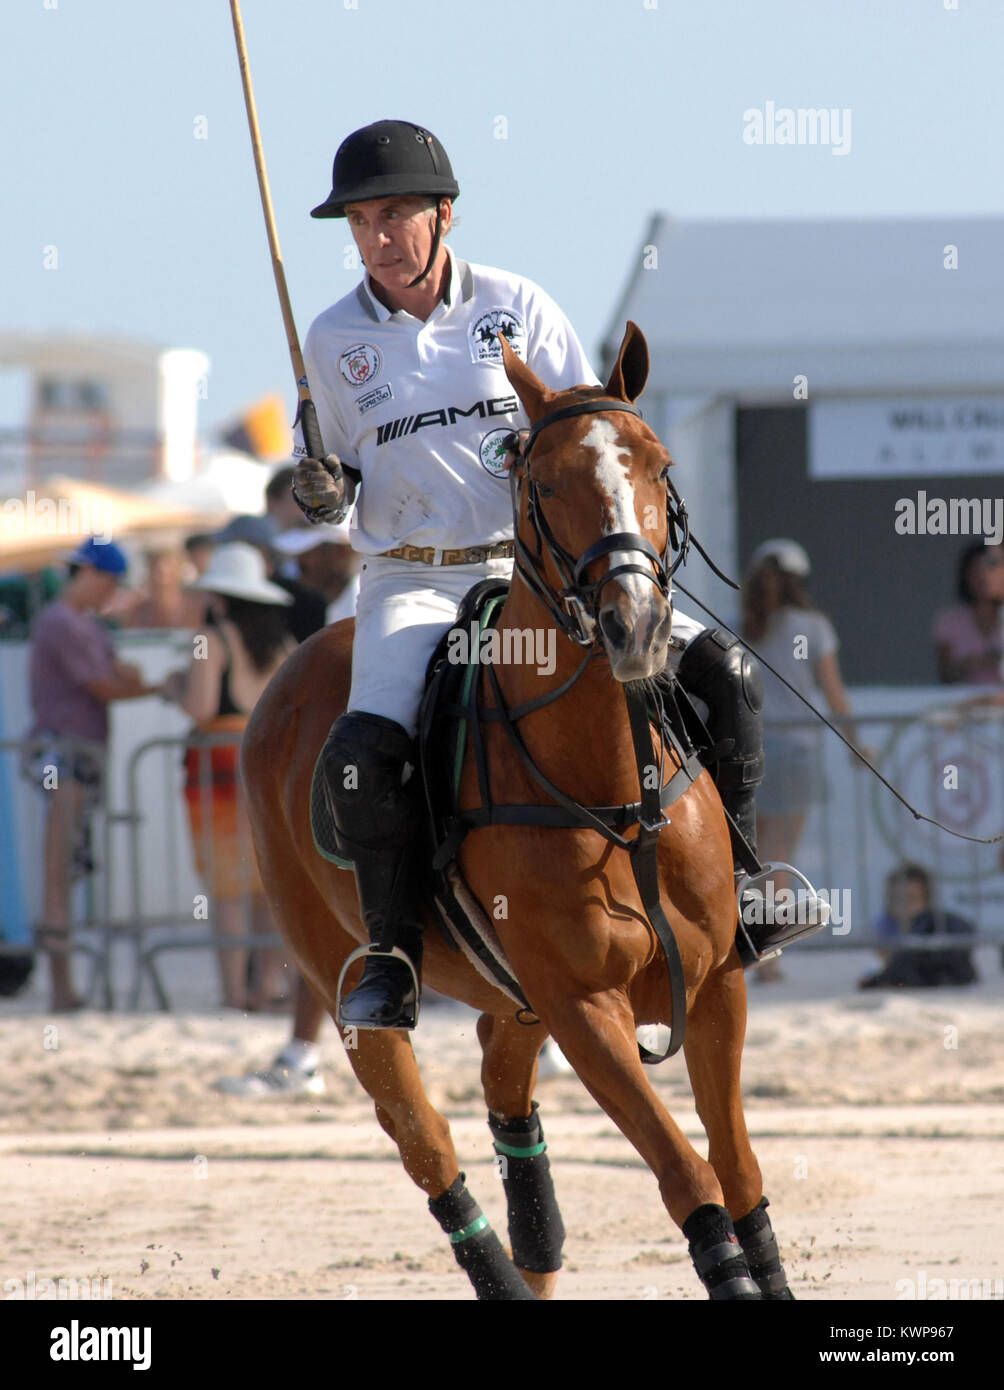 MIAMI BEACH, FL - APRIL 22:  'America's Most Wanted' host John Walsh attends AMG Miami Beach Polo World Cup - Twenty-eight-year-old Meghan Walsh also attended the event to support her dad and showcase her own fashion designs.  John Edward Walsh (born December 26, 1945) is an American television personality, criminal investigator, human and victim rights advocate and the host of America's Most Wanted. Walsh is known for his anti-crime activism, which he became involved with following the murder of his son, Adam, in 1981; in 2008, the now deceased serial killer Ottis Toole was named as the kille Stock Photo